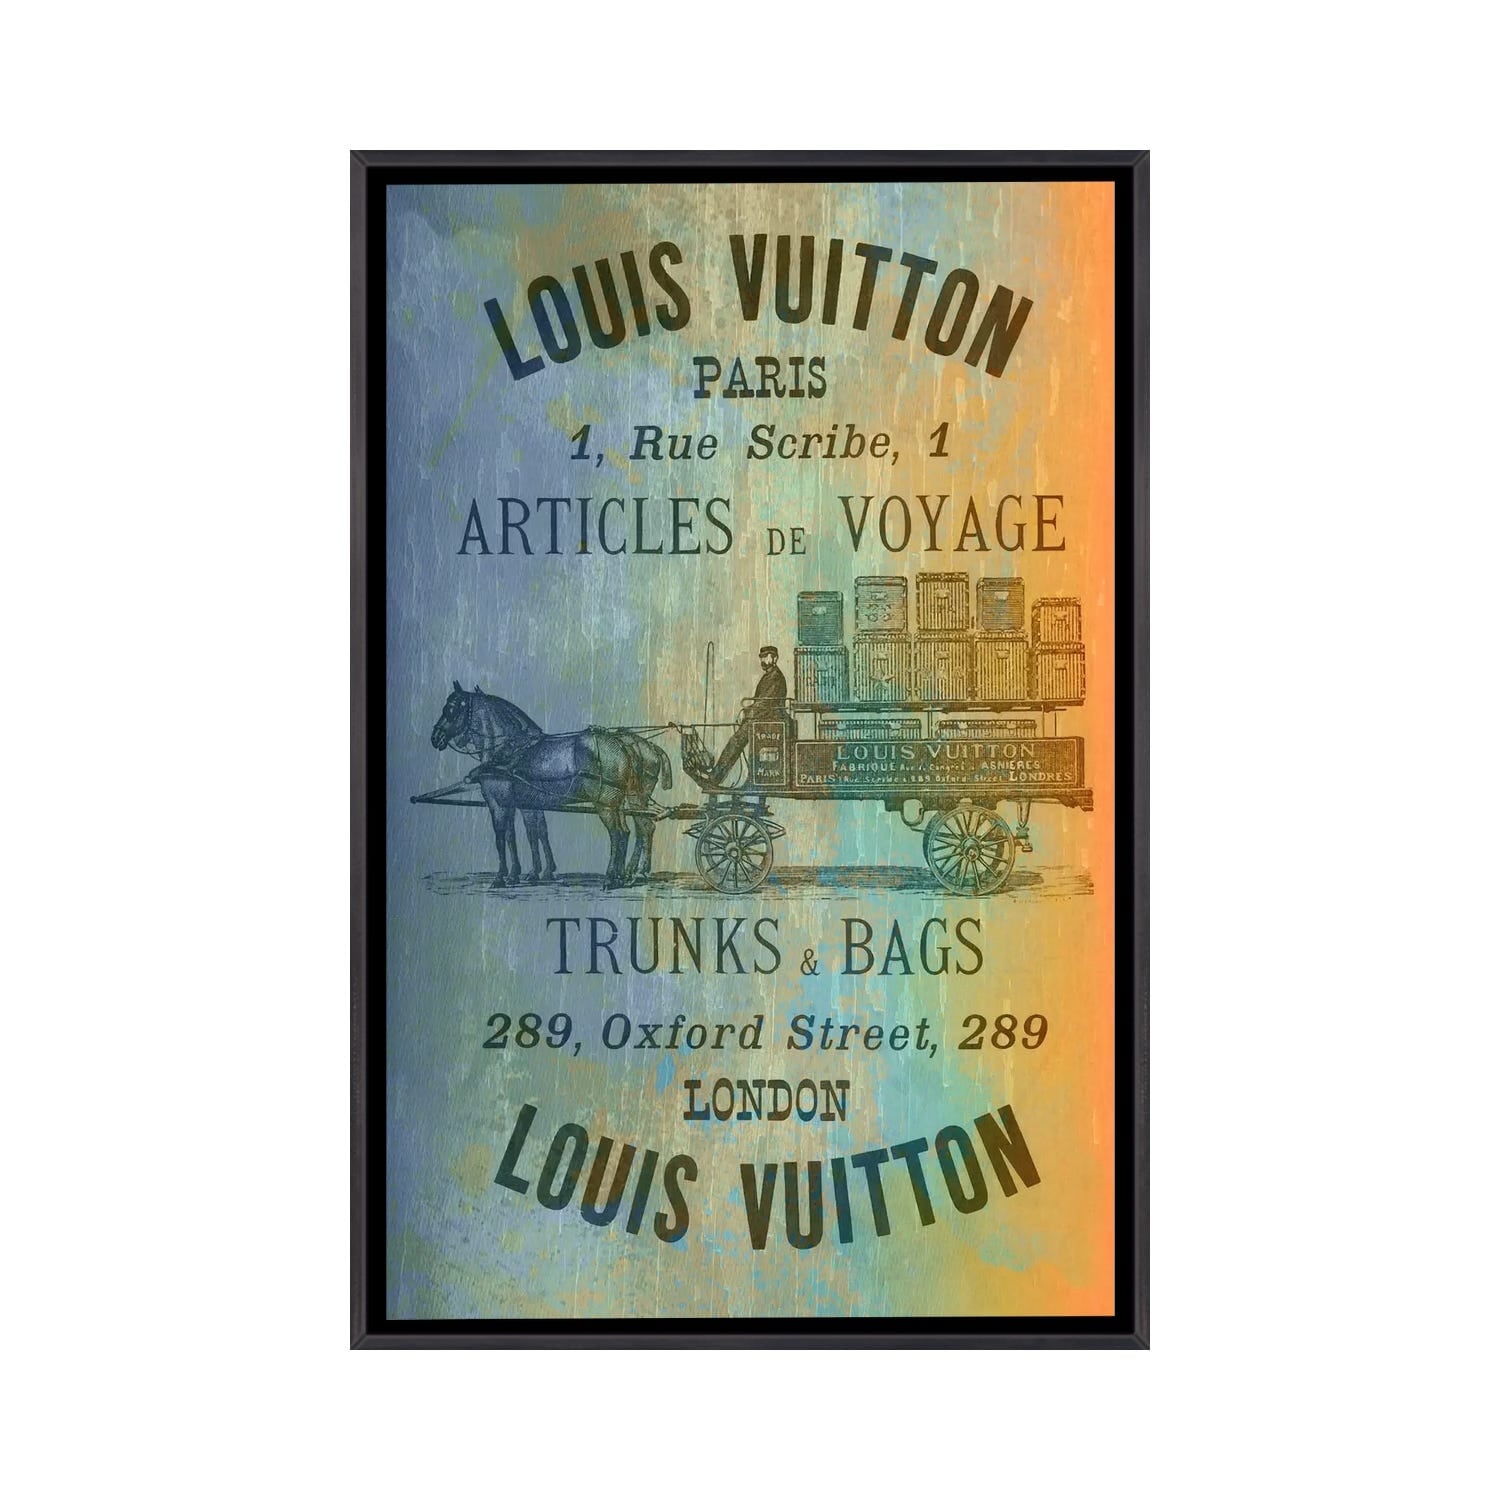 How to take care of a Louis Vuitton bag - The Elegant Oxford